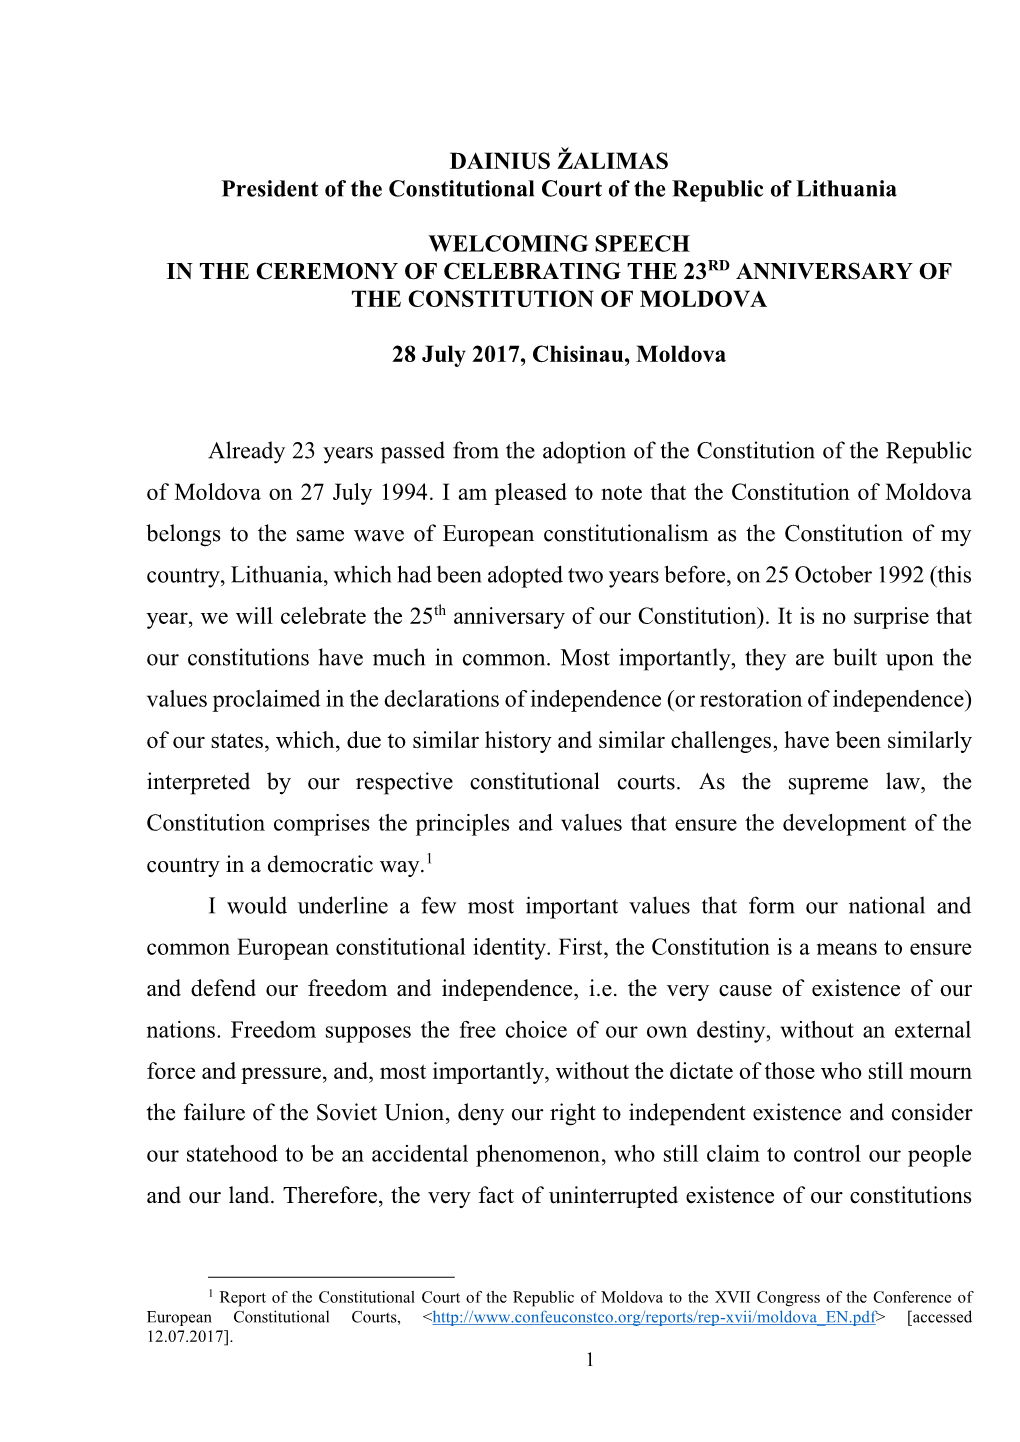 The 23Rd Anniversary of the Constitution of Moldova